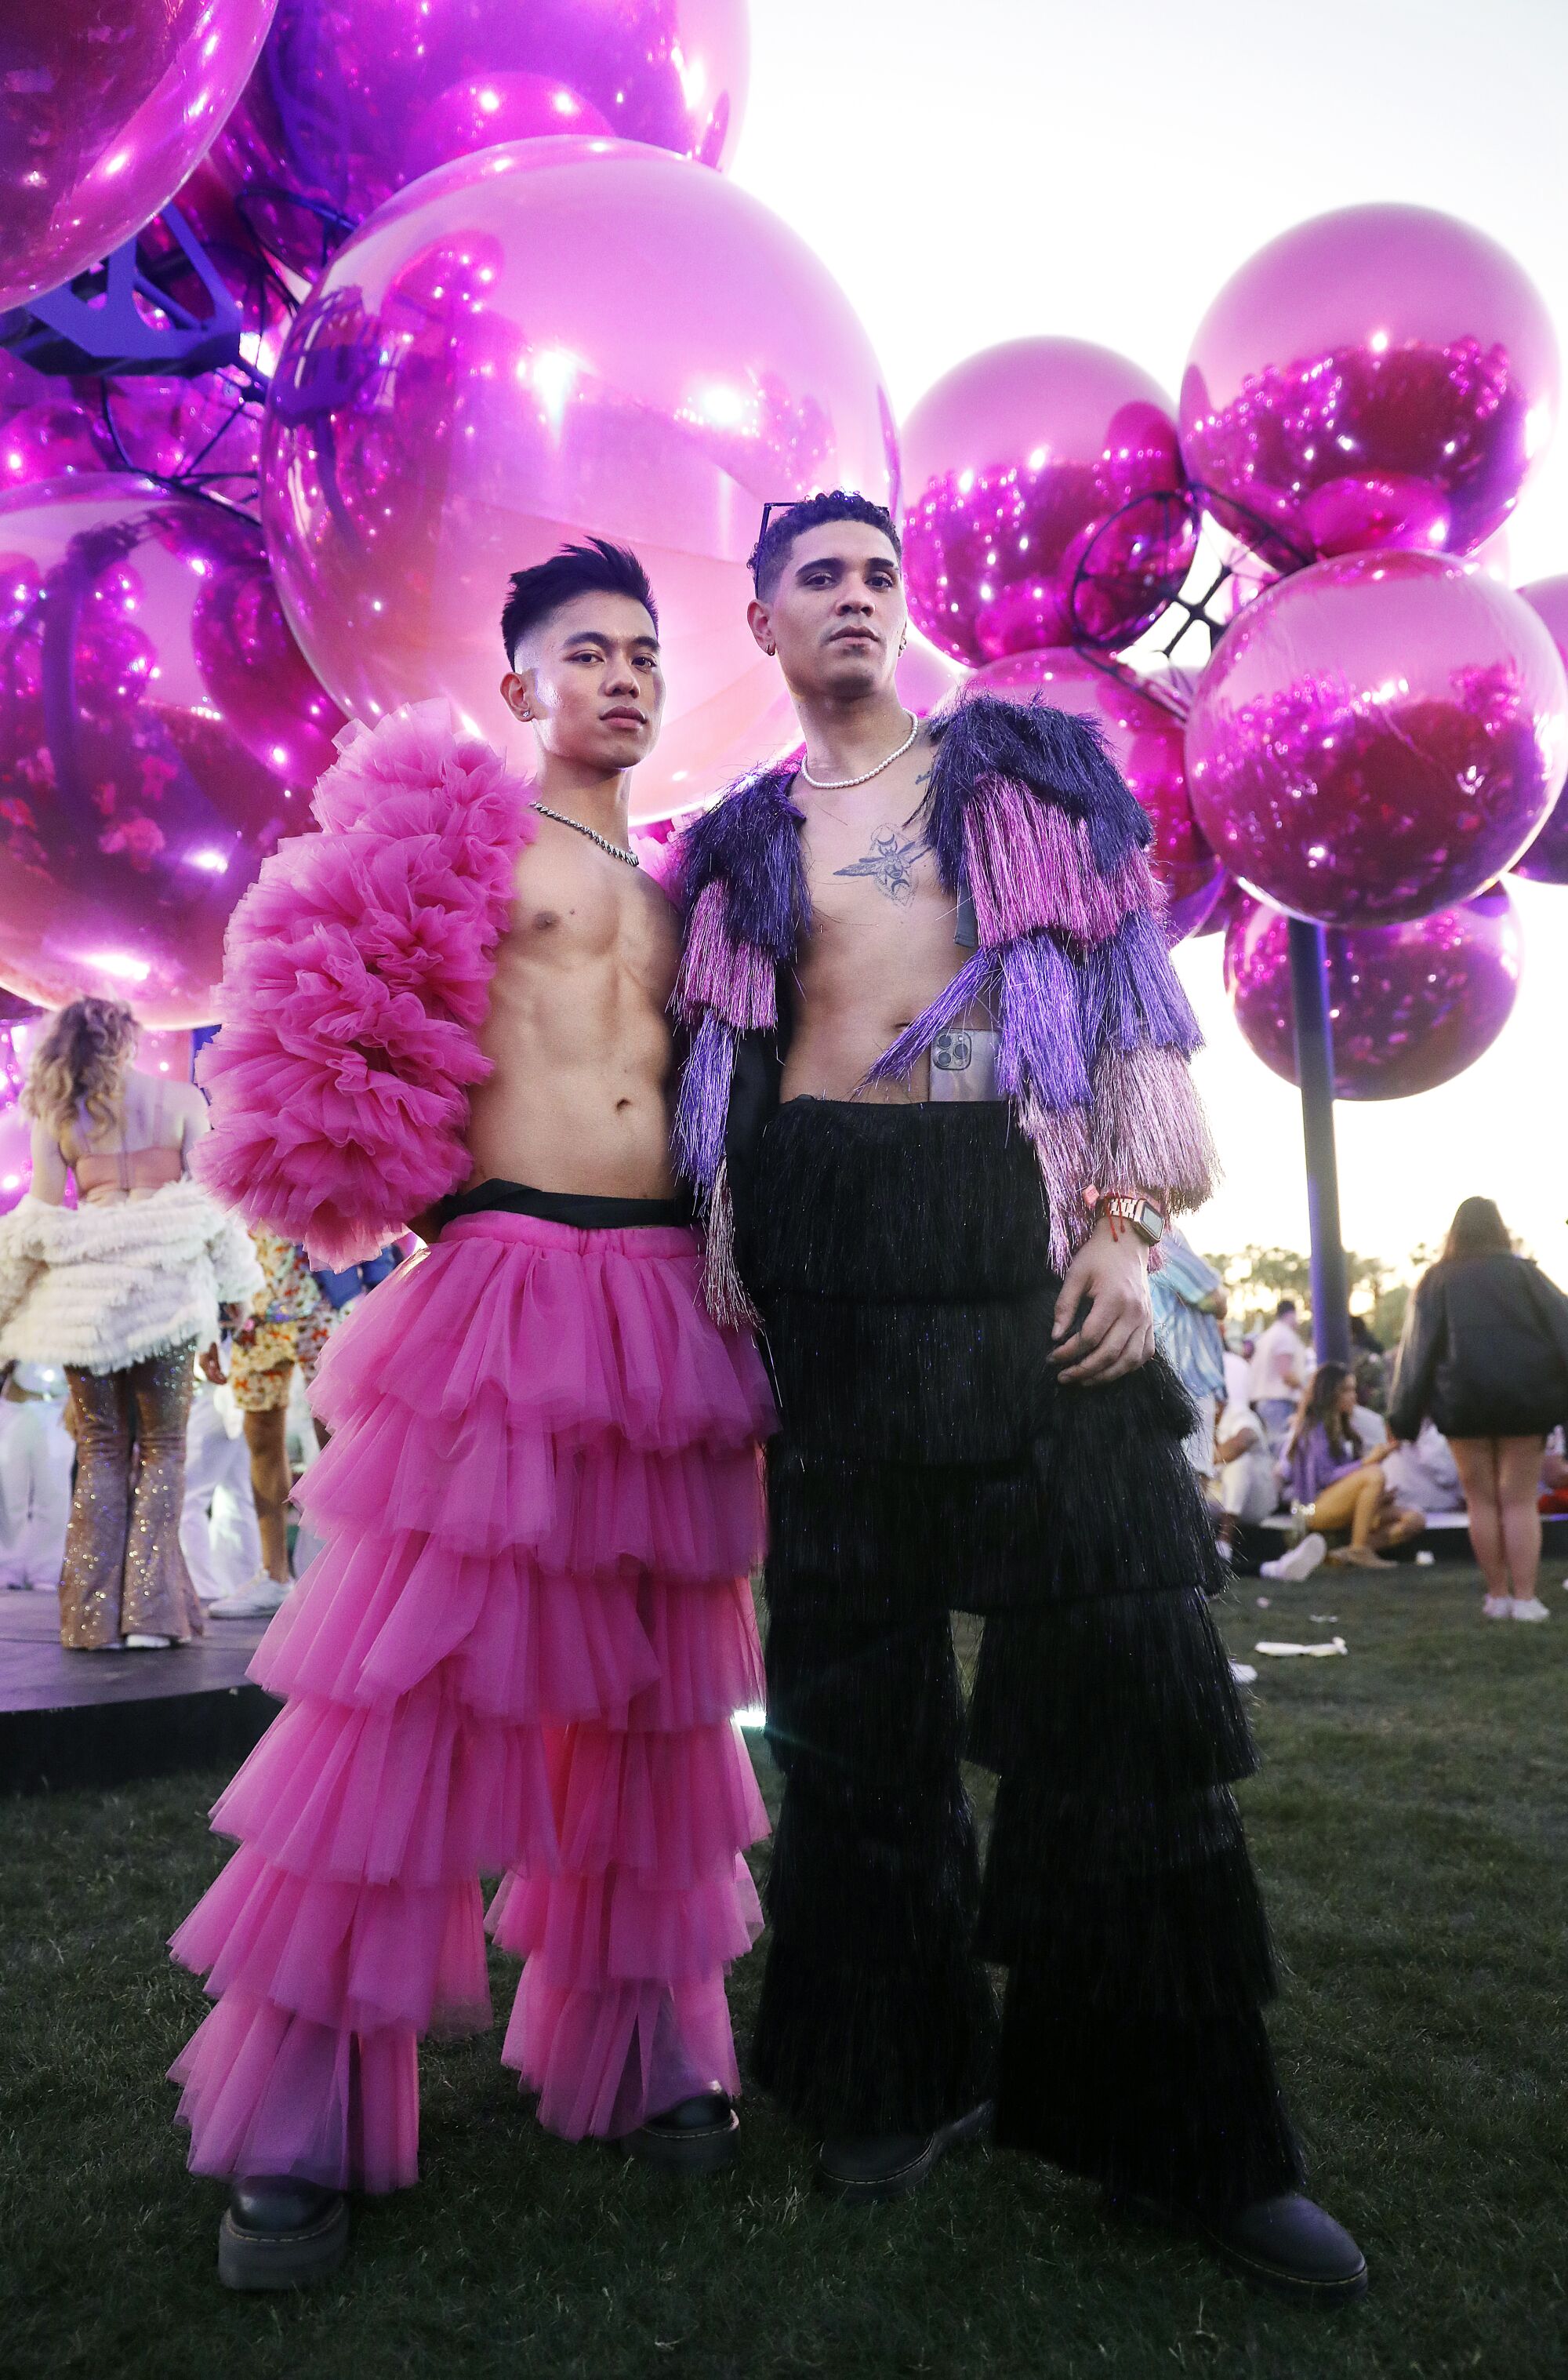 Two men pose in front of a pink ball sculpture